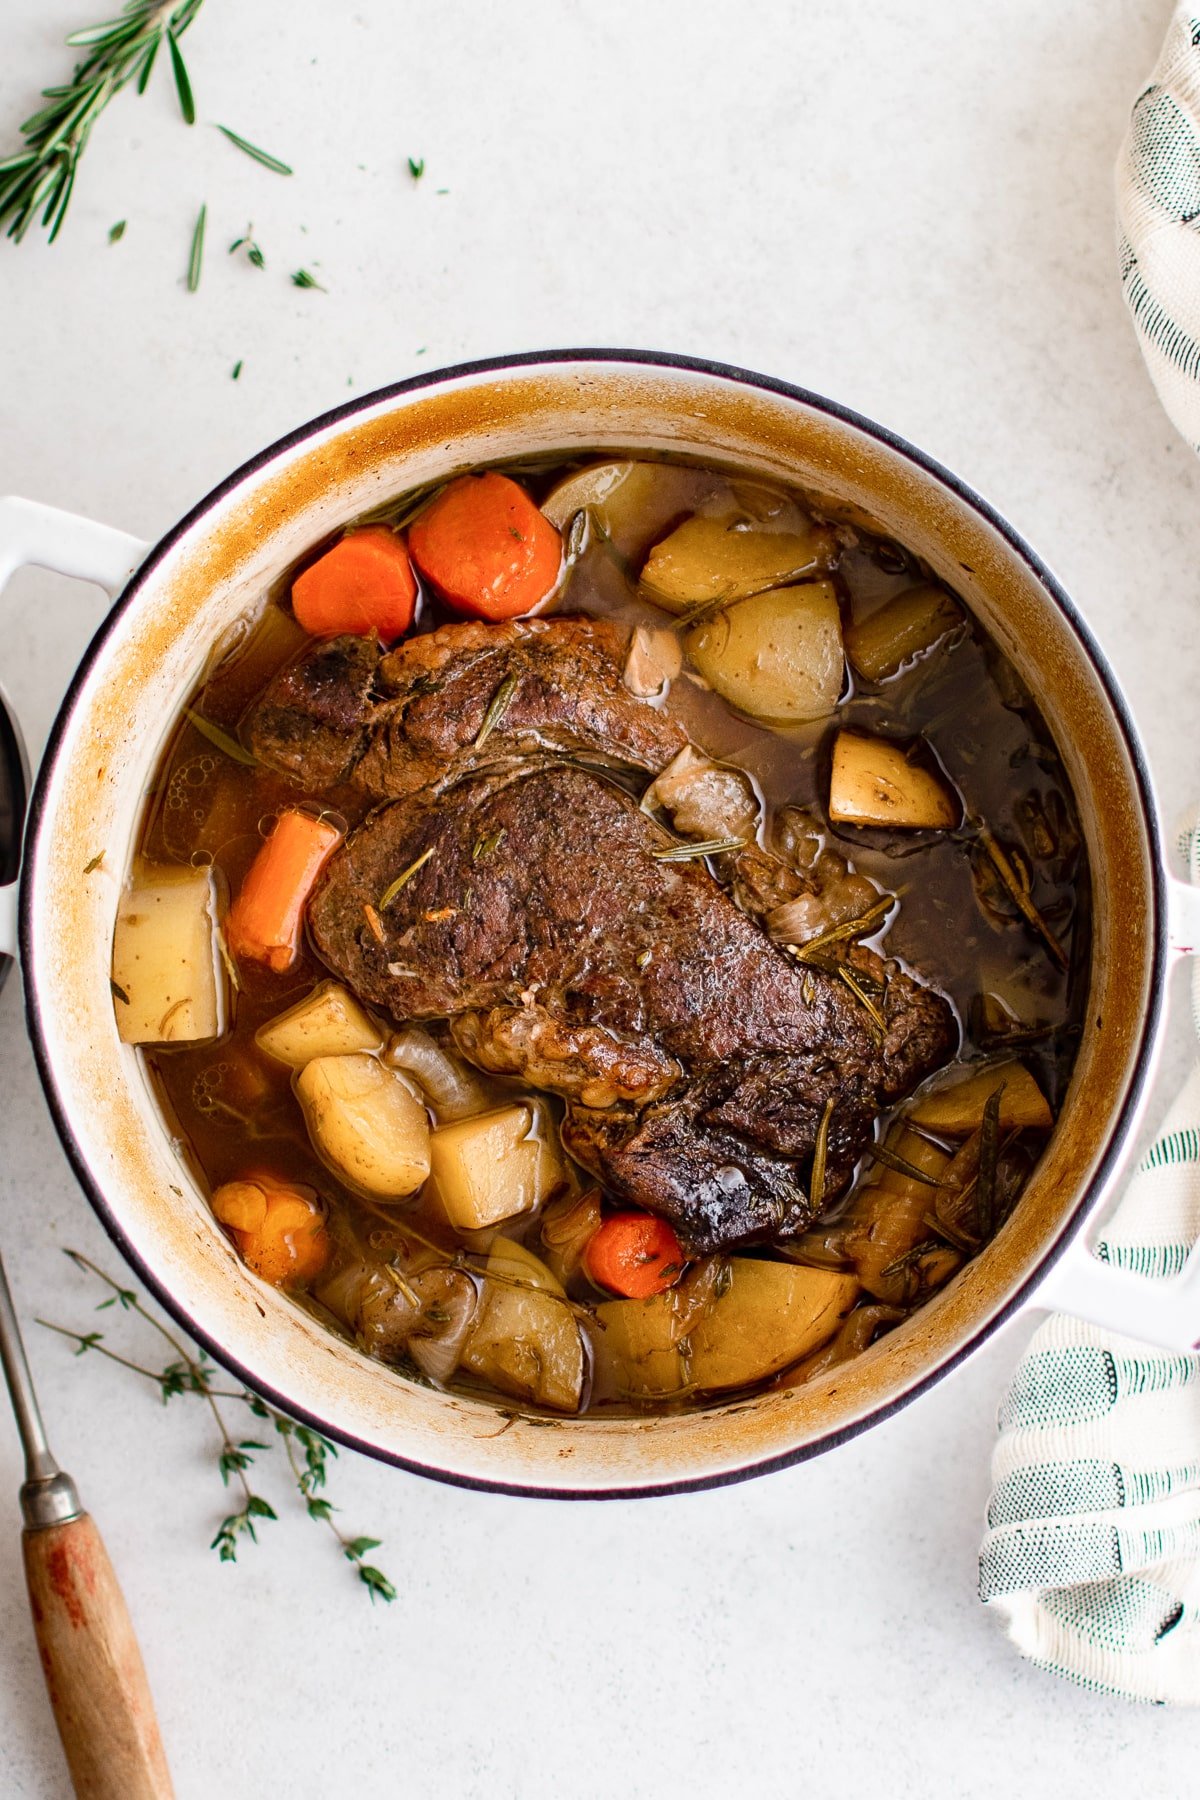 Dutch oven pot roast made with potatoes, carrots, and beef chuck roast just out of the oven.